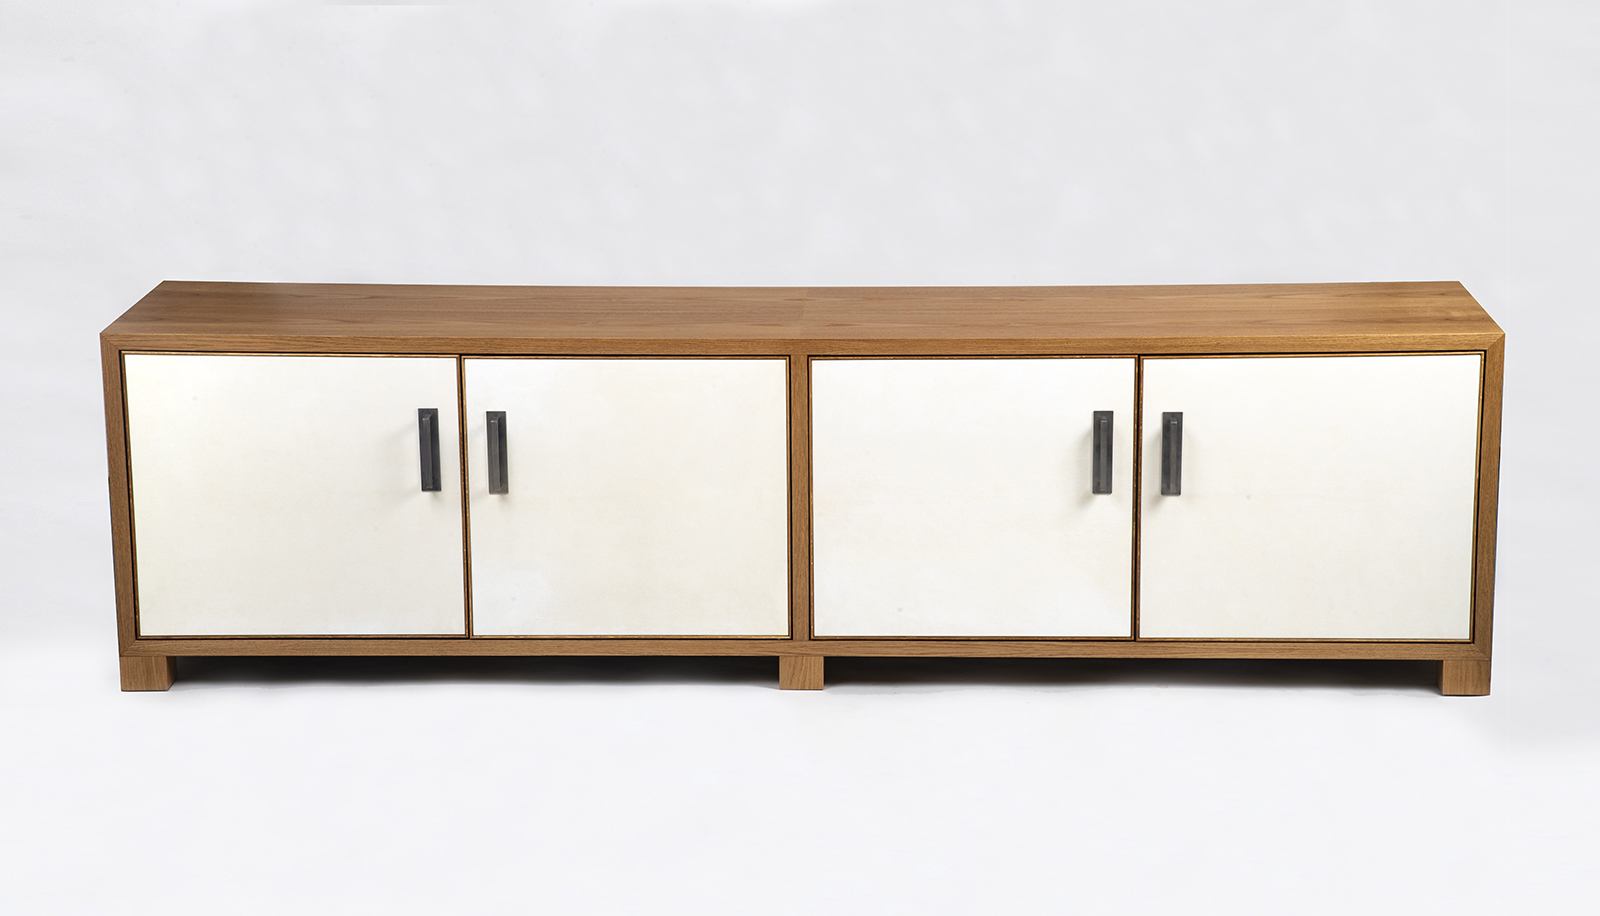 A Modernist Style Media Cabinet by ILIAD Design